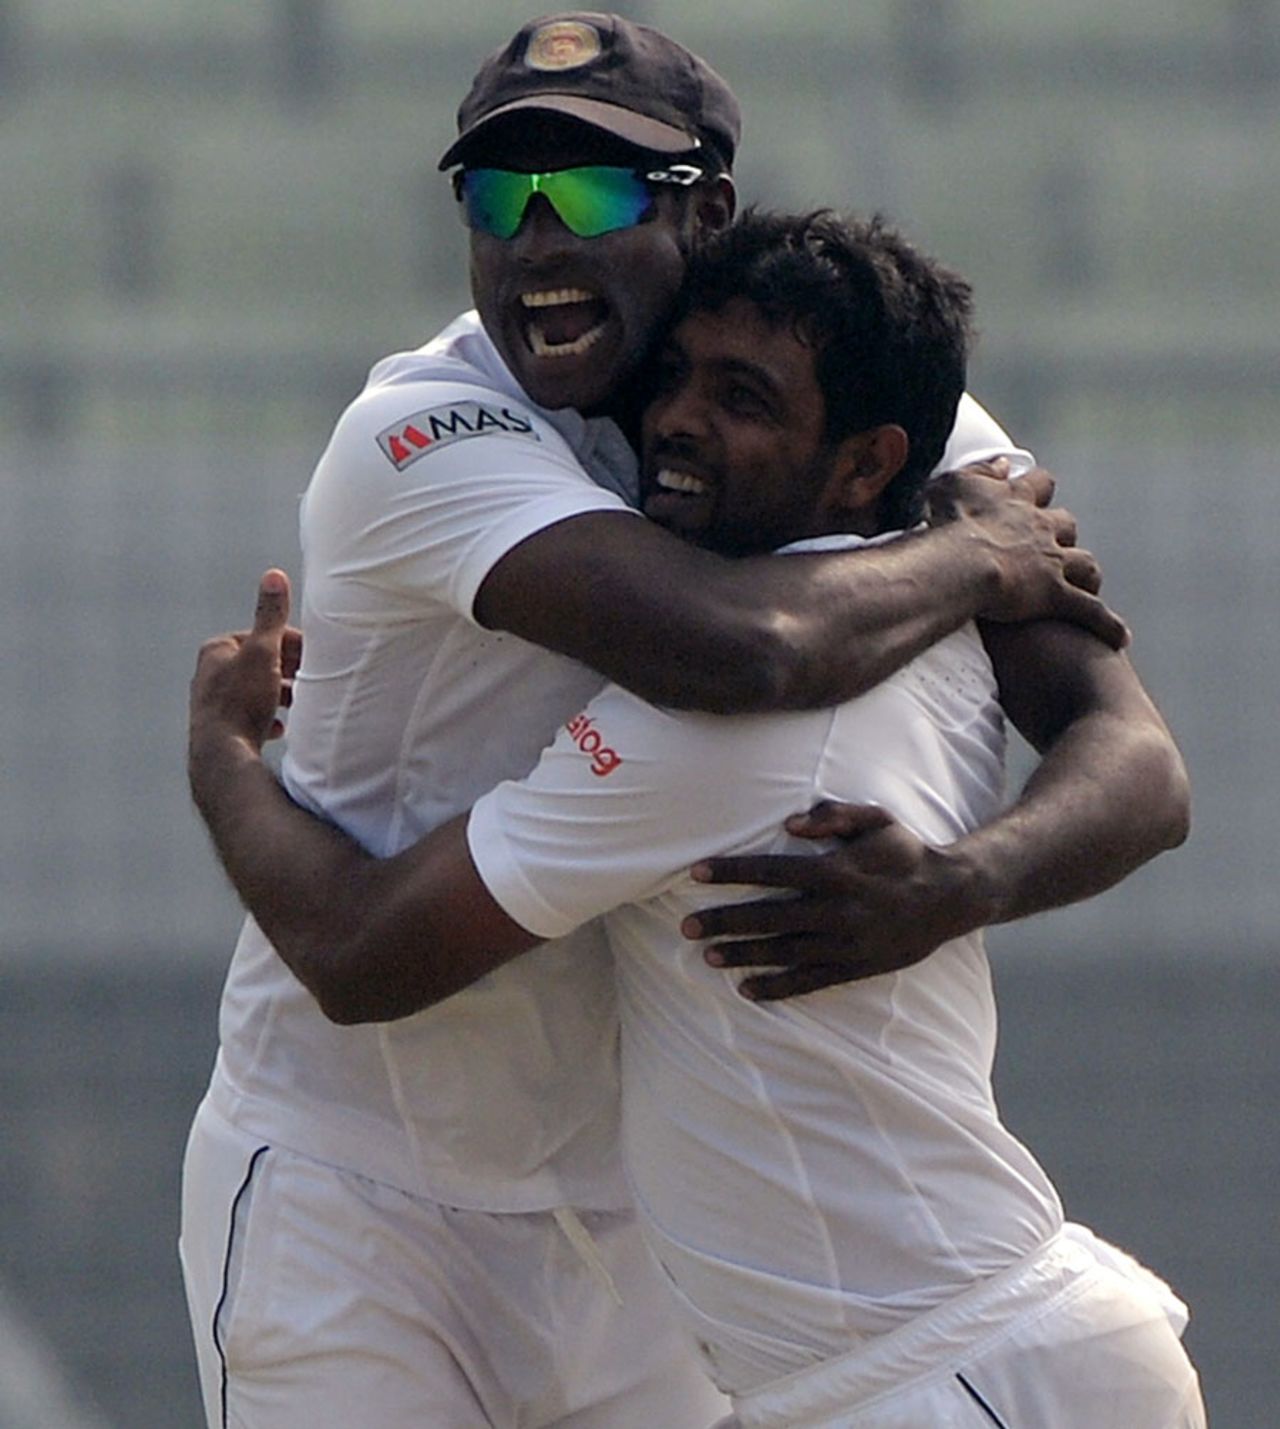 Angelo Mathews embraces Dilruwan Perera after the spinner took a wicket, Bangladesh v Sri Lanka, 1st Test, Mirpur, 4th day, January 30, 2014